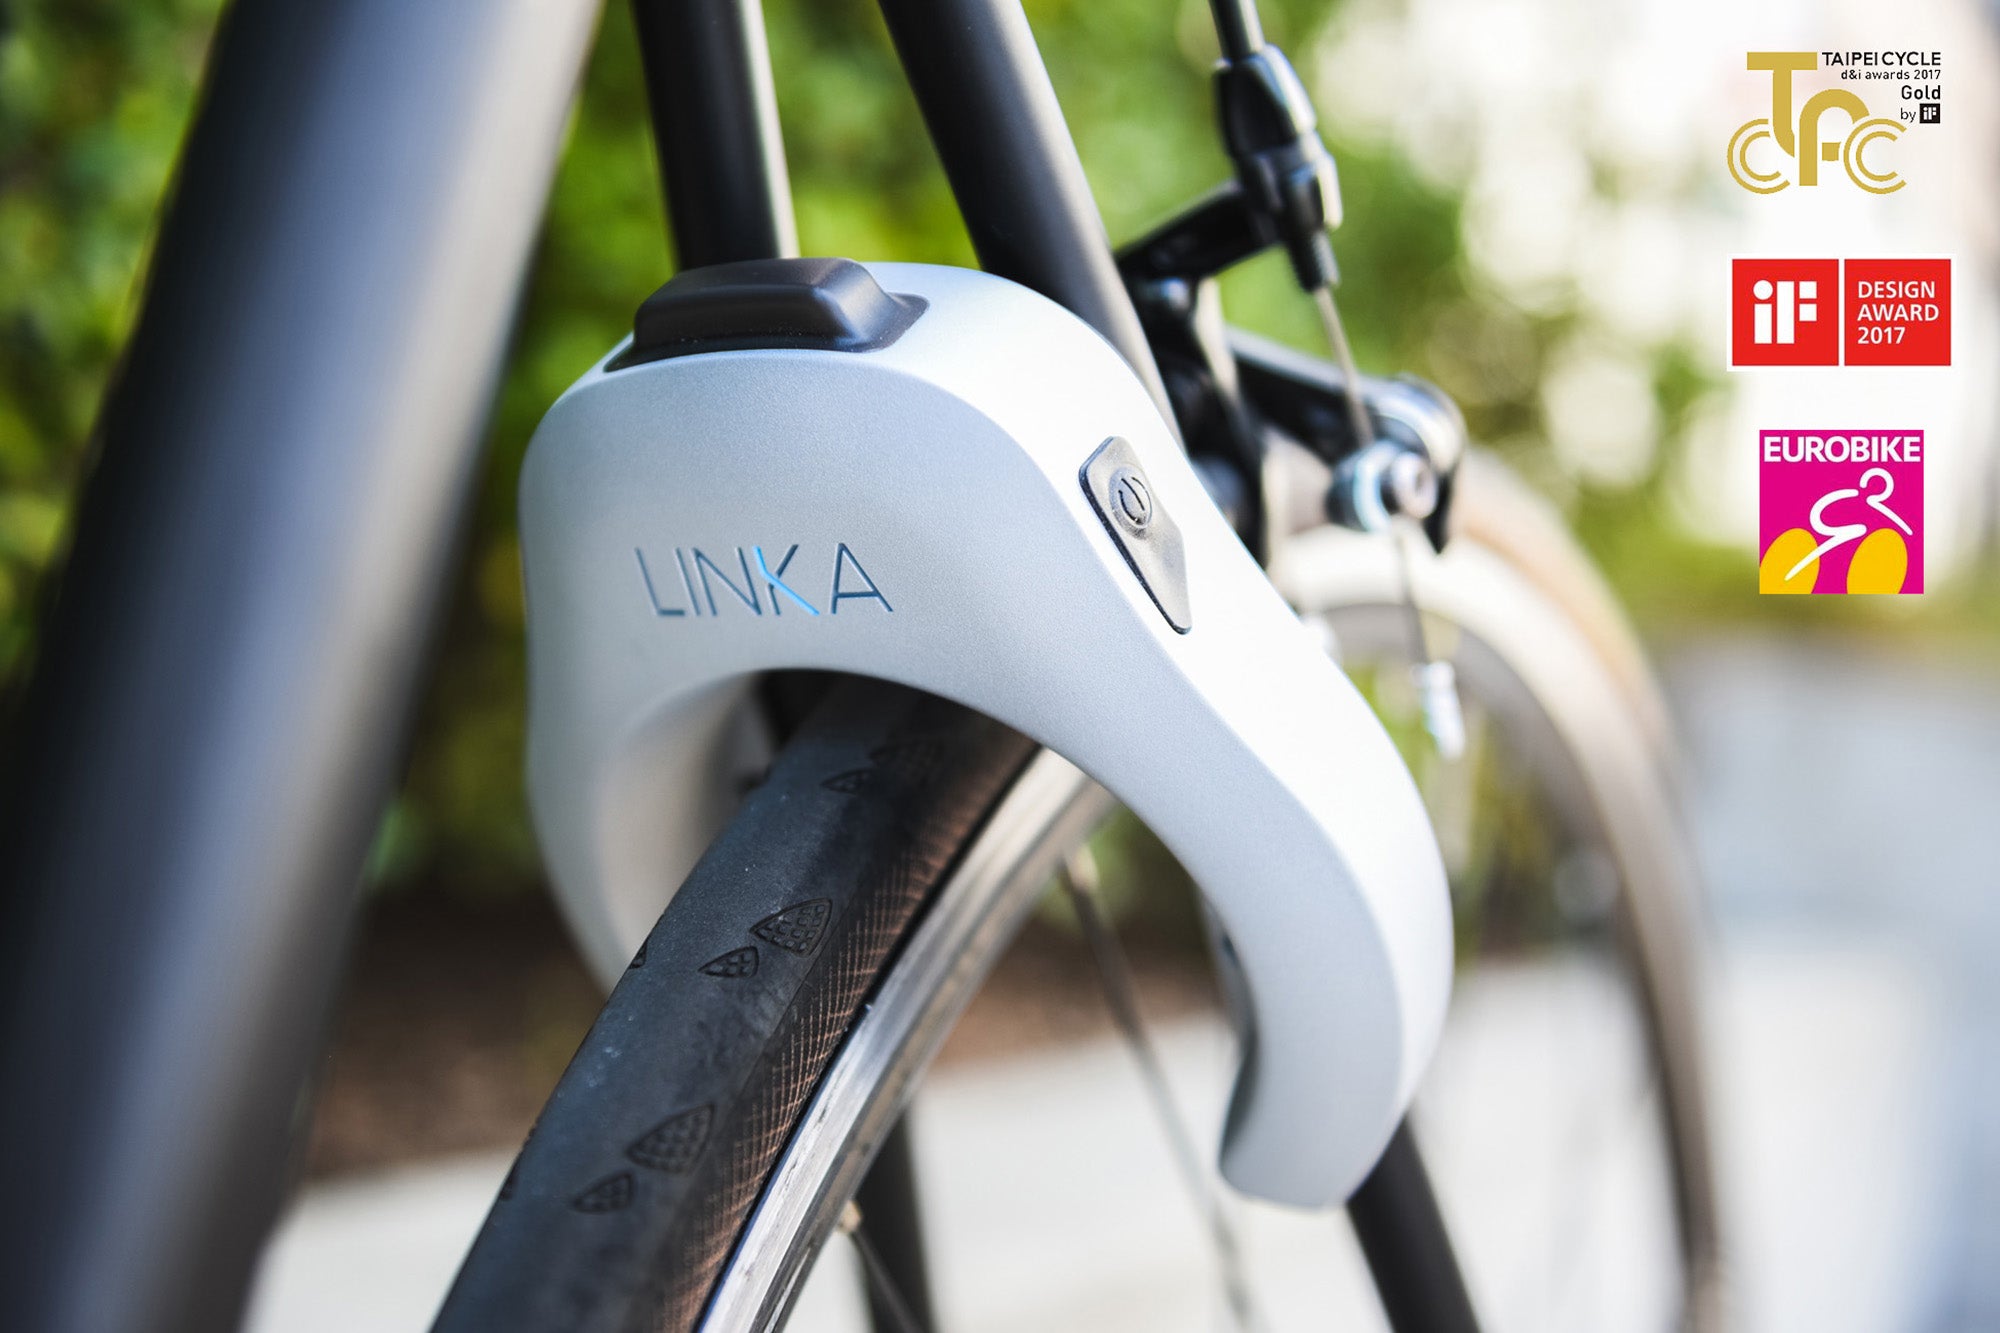 Still not convinced? Six reasons the Original LINKA® is the best bike lock for you.